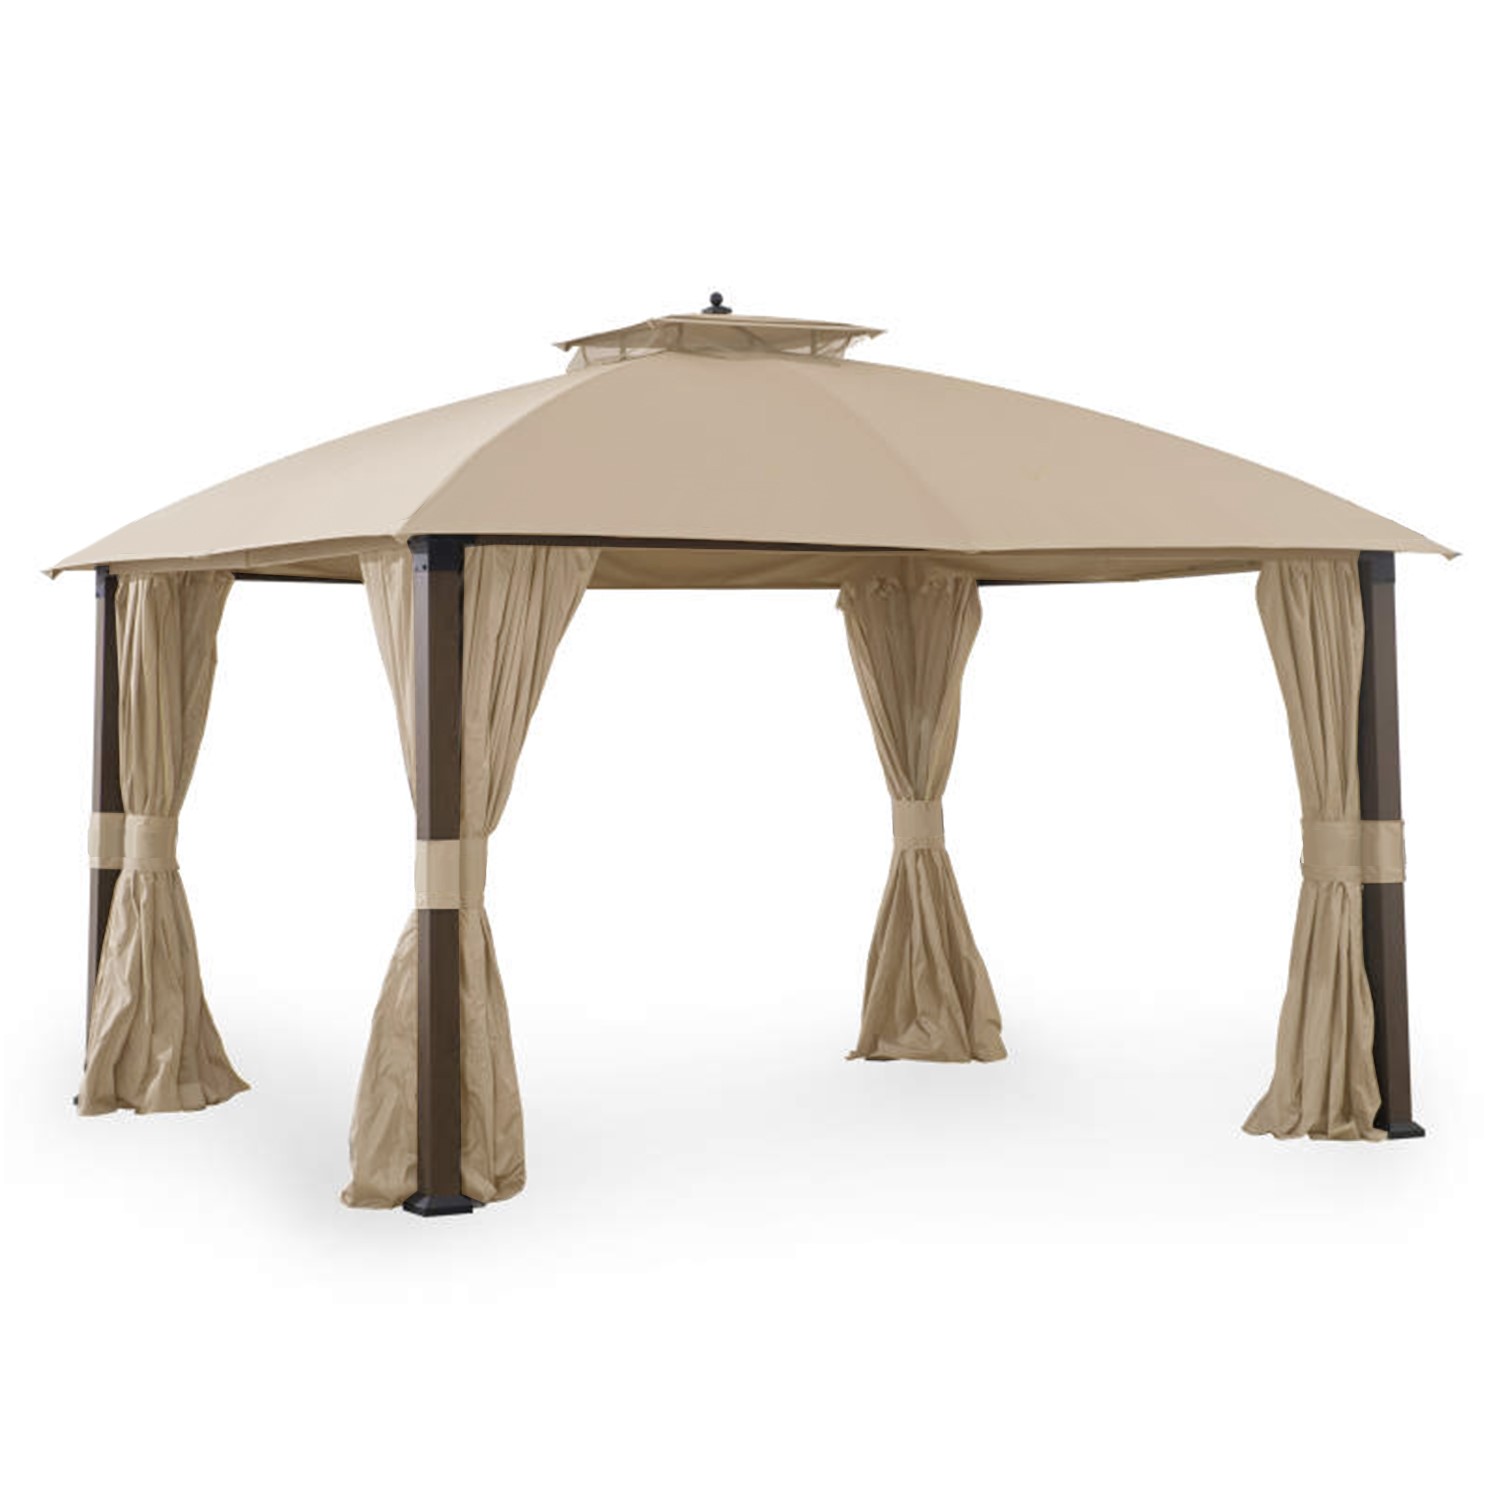 Replacement Canopy for Broyhill Eagle Brooke Gazebo- RipLock 350